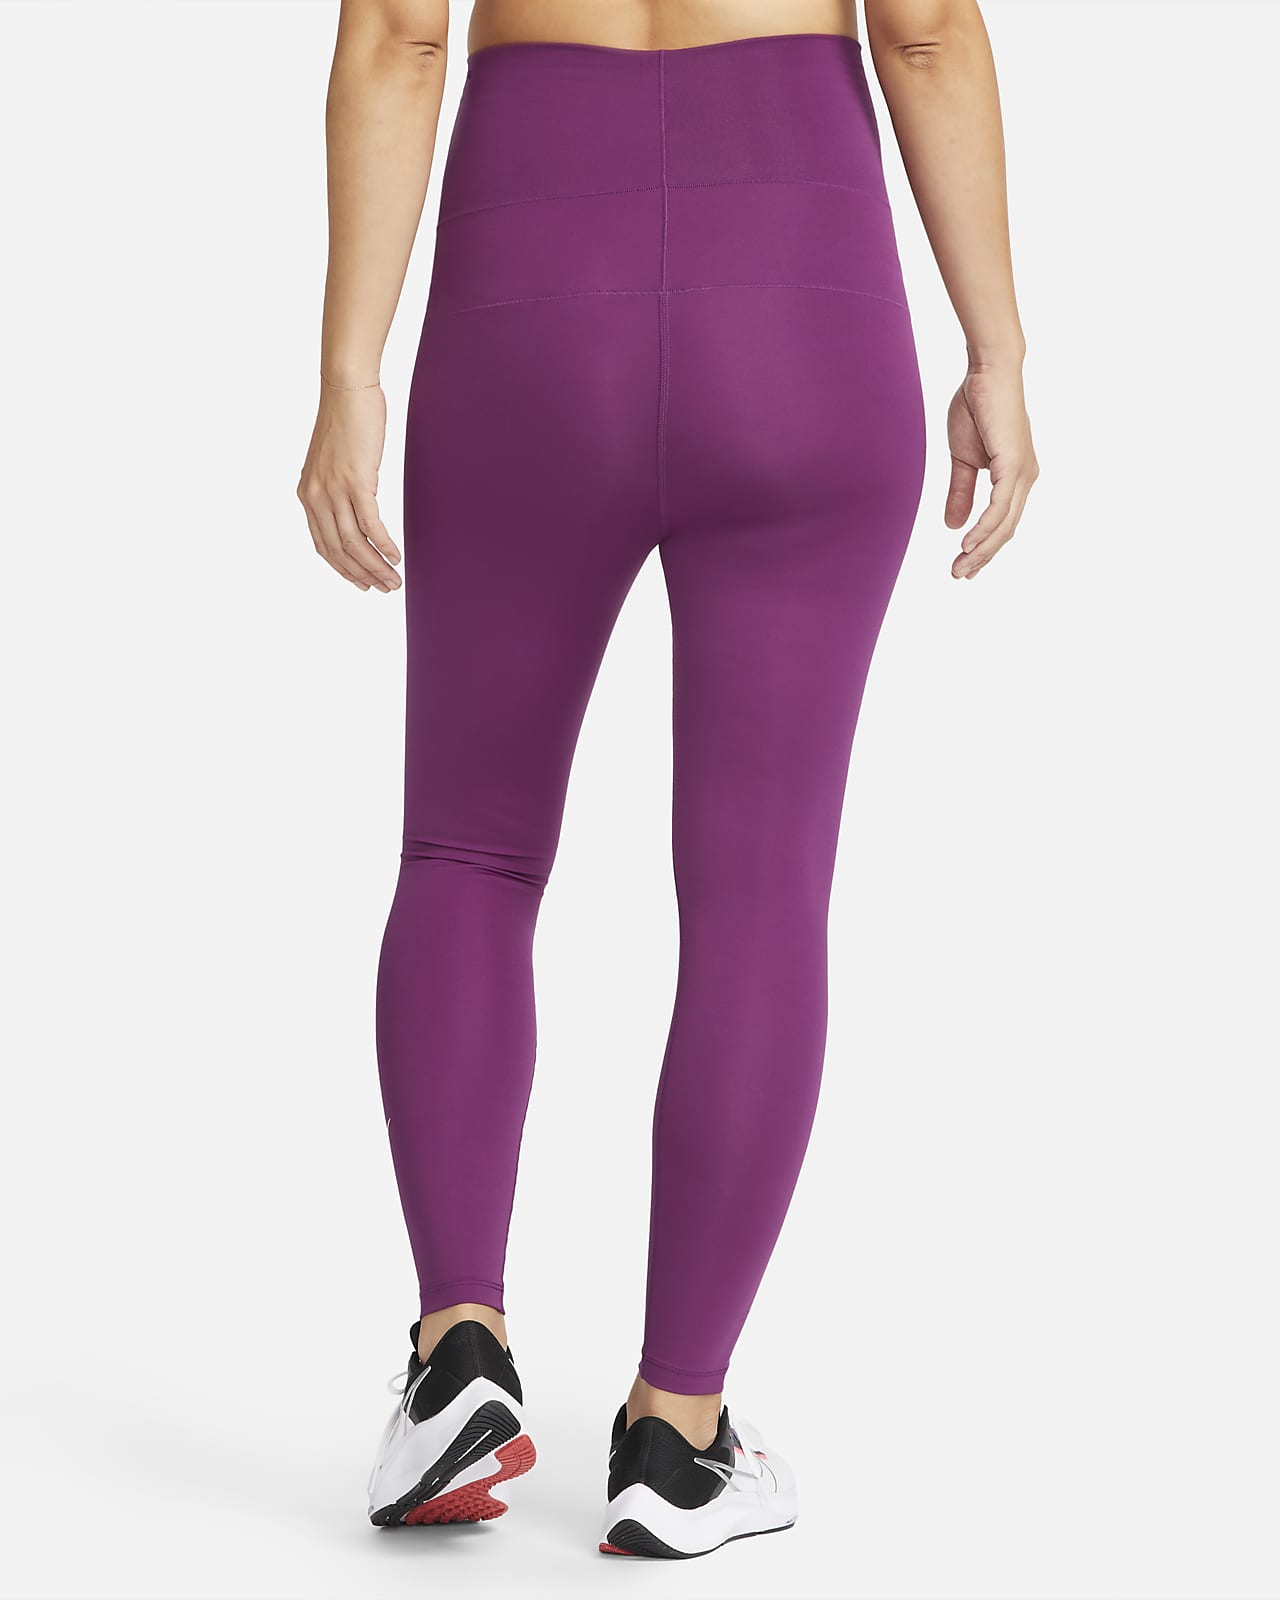 https://static.nike.com/a/images/t_PDP_1280_v1/f_auto,q_auto:eco/999c009e-6e55-462f-87f9-734461299ce1/one-m-womens-high-rise-leggings-maternity-ggK4R3.png